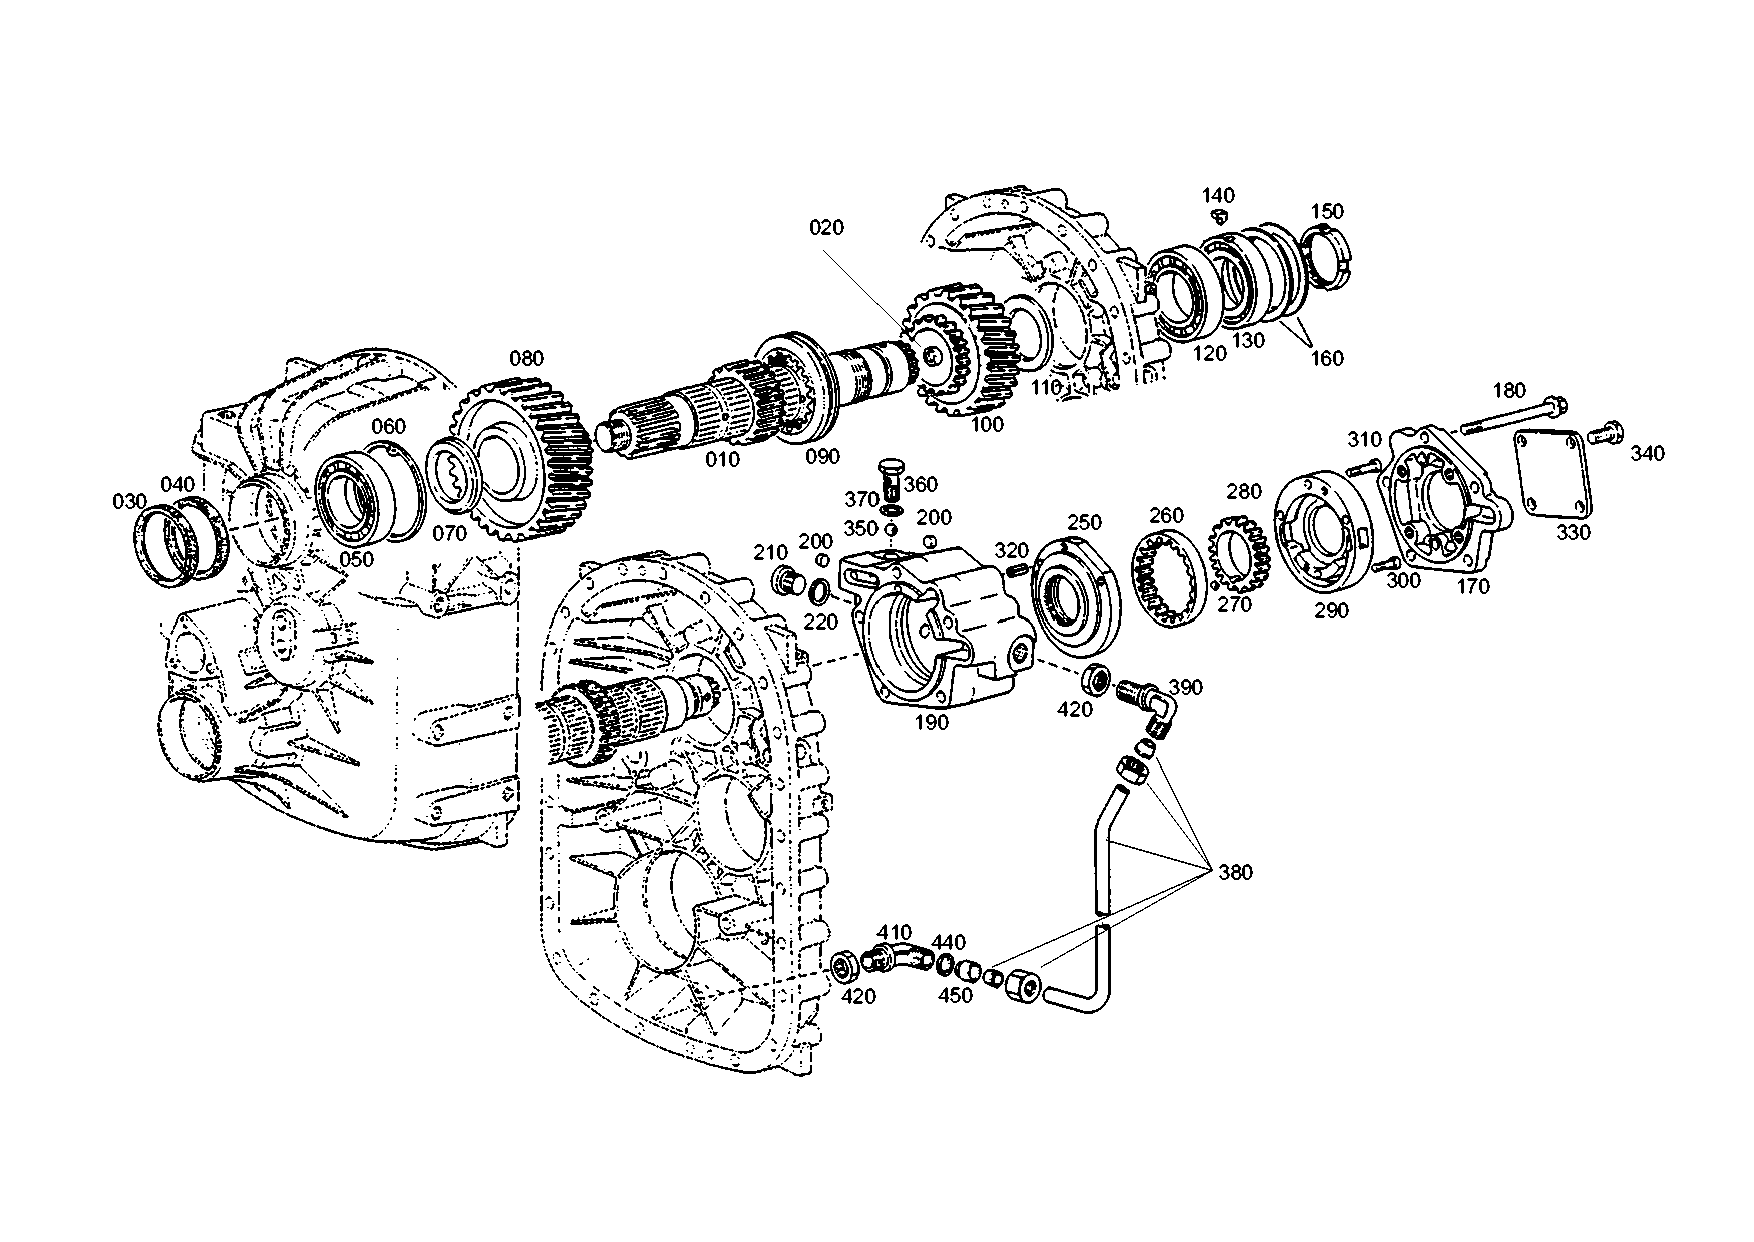 drawing for TITAN GMBH 1-99-916-002 - COVER (figure 2)